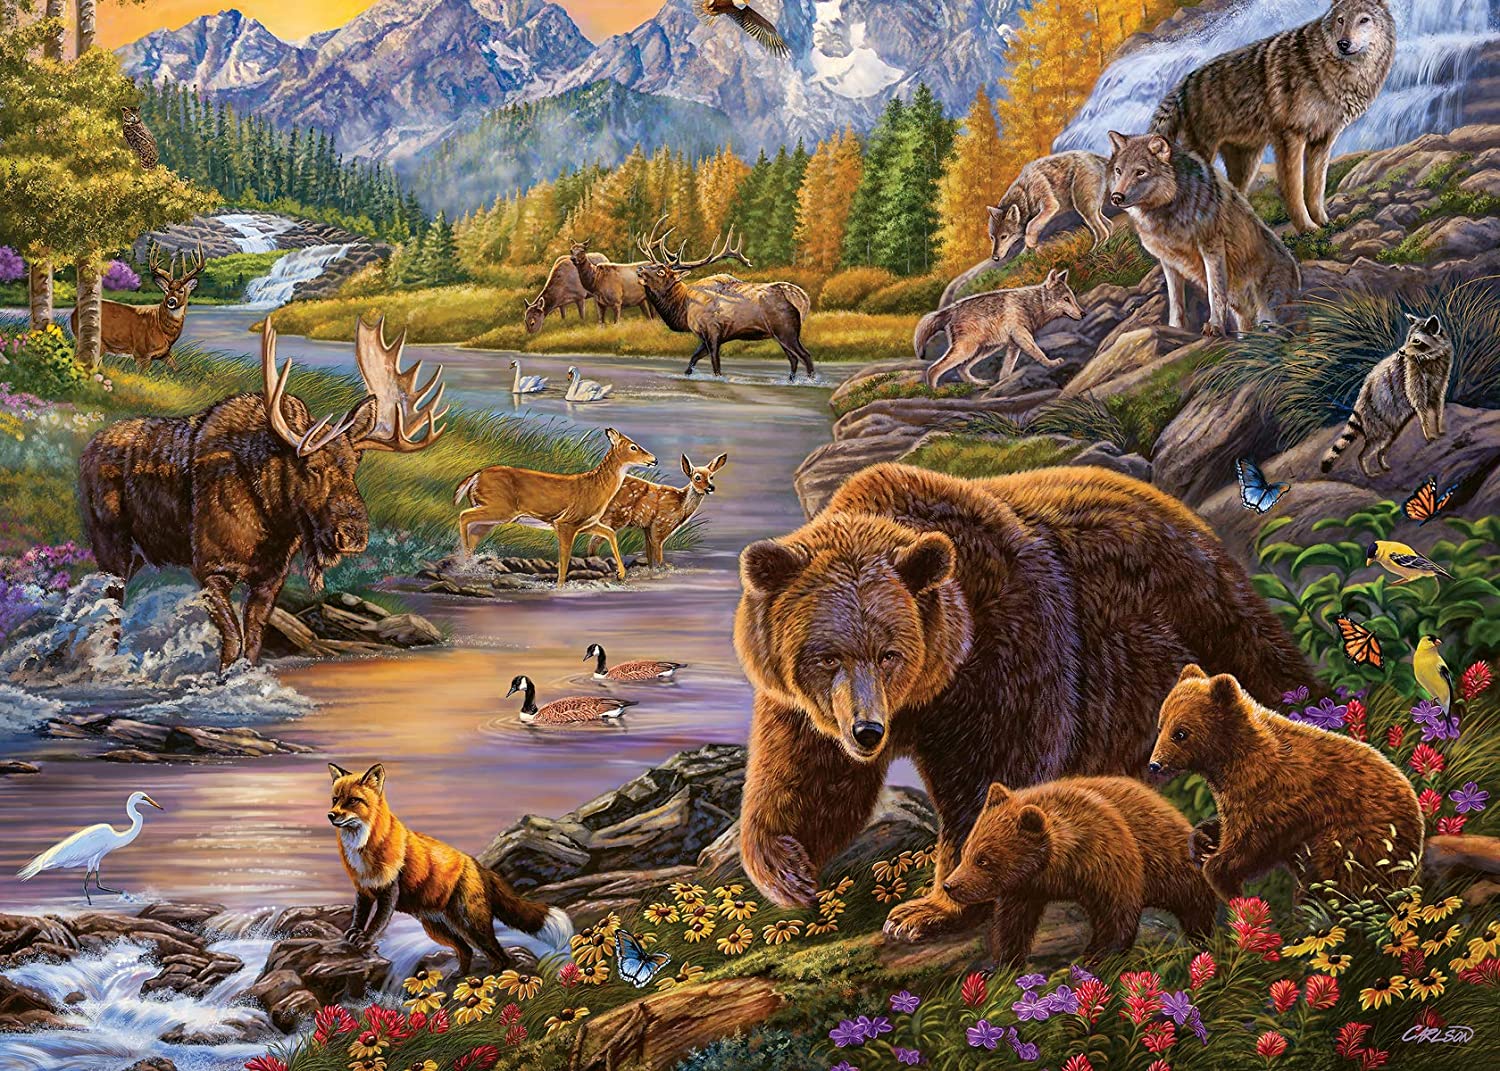 Wilderness Large Font Puzzle 500 Pieces by Ravensburger #16790